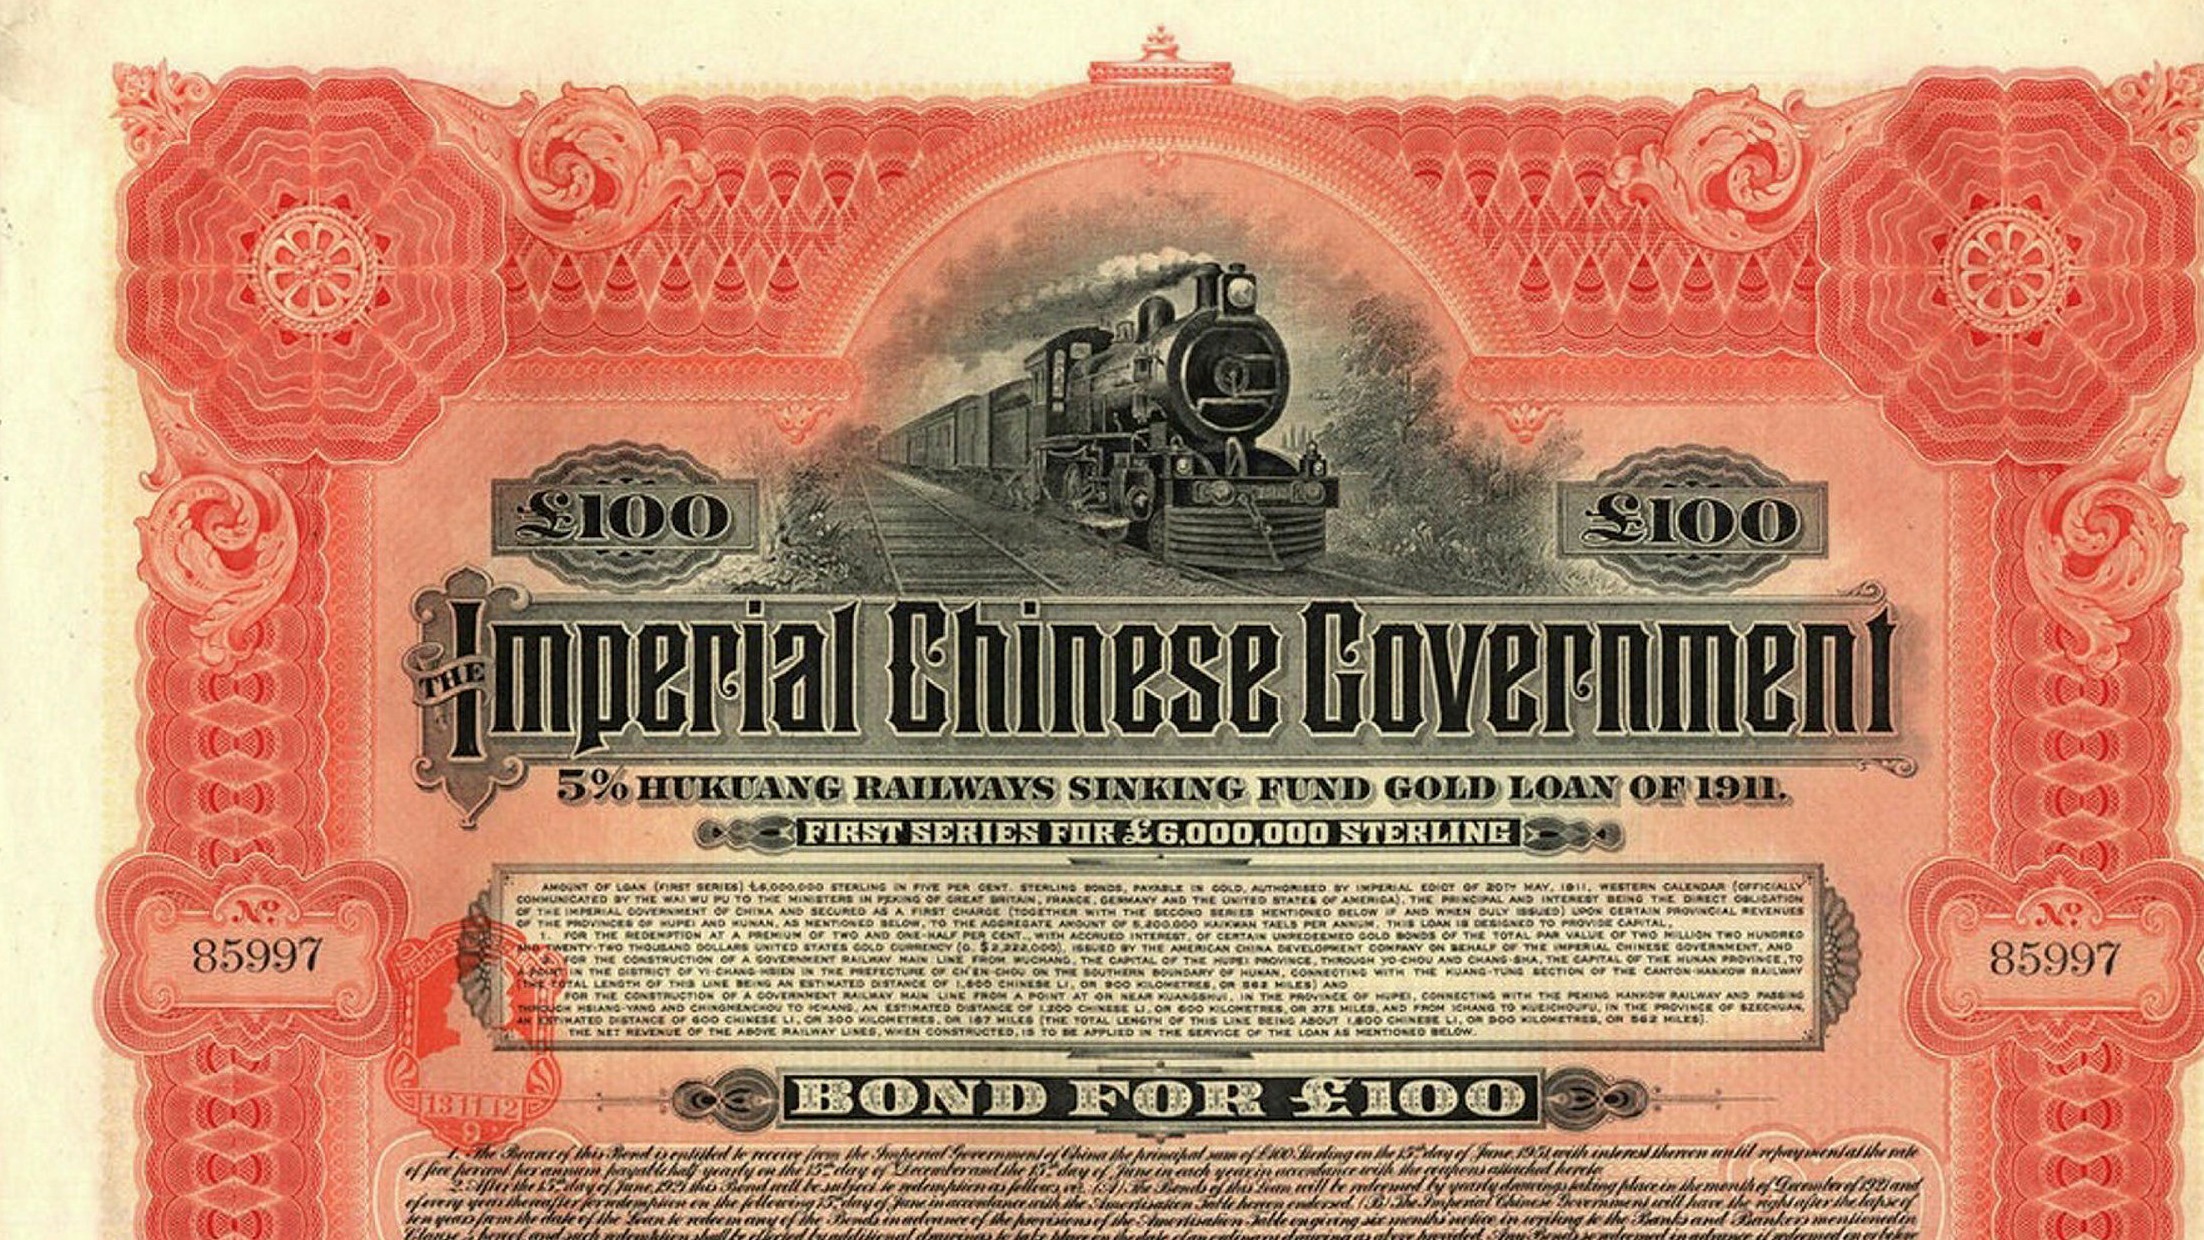 Antique Chinese bonds are now in play | Financial Times